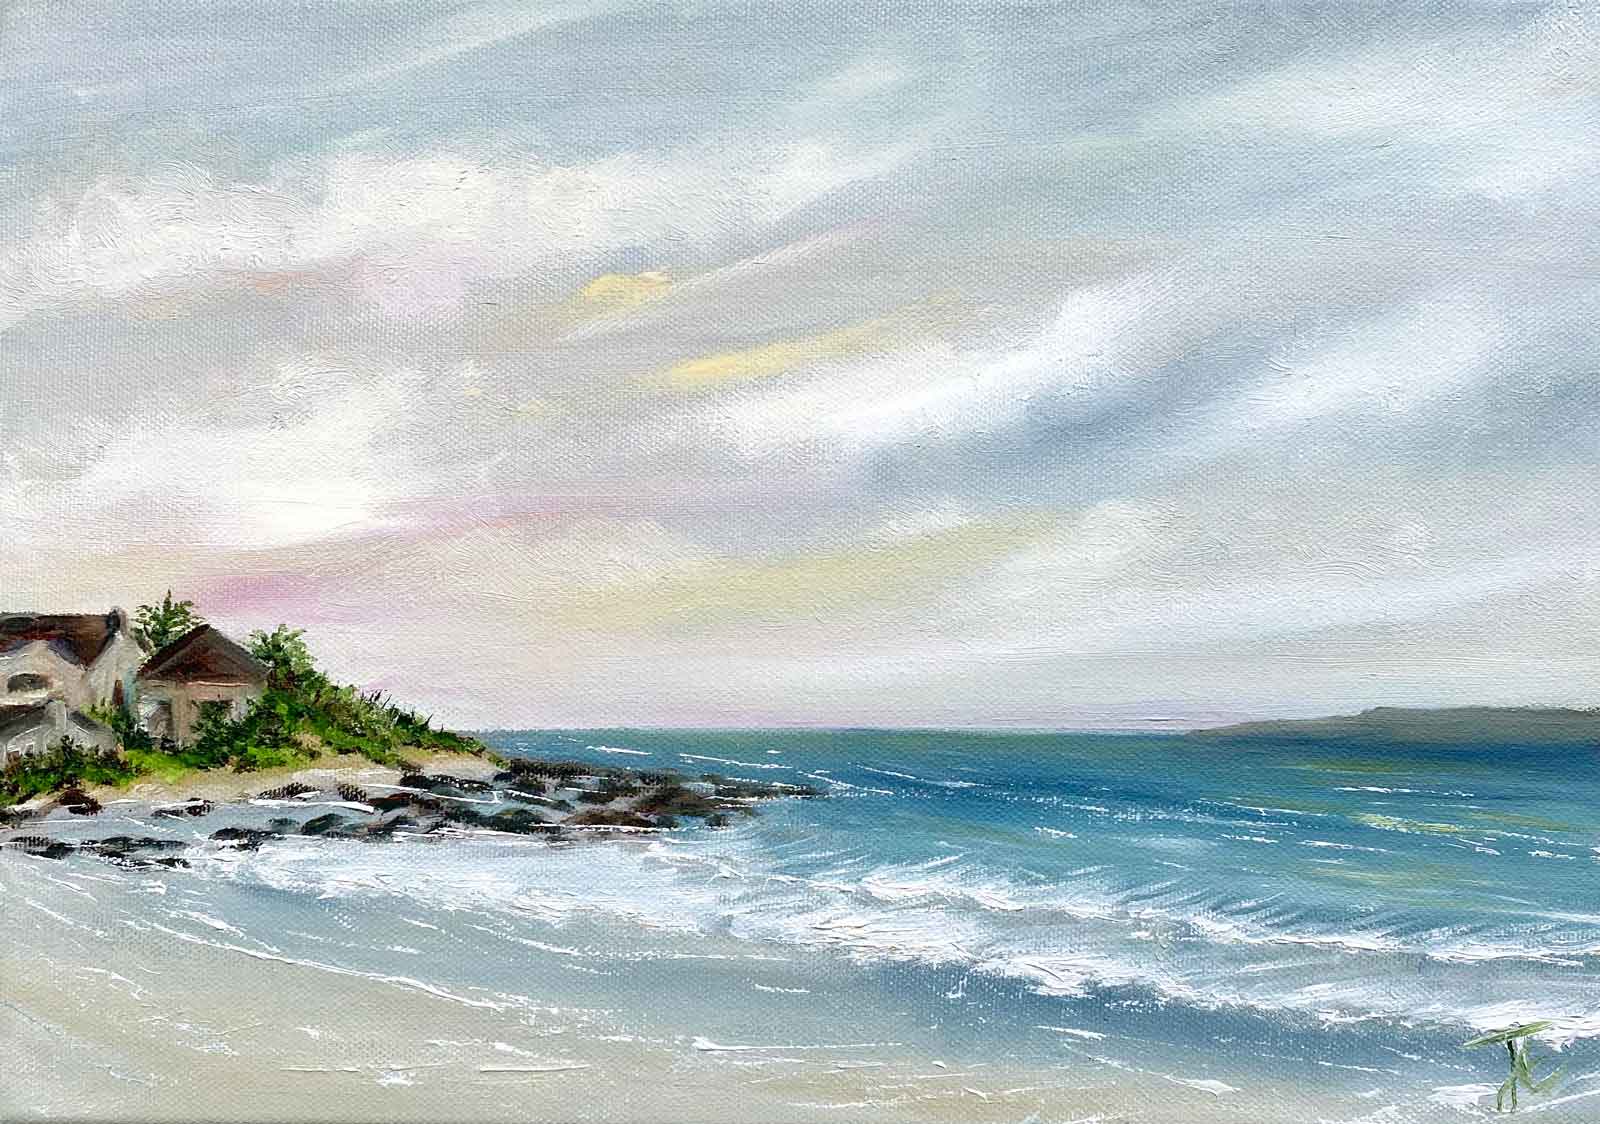 Seascape painting of beach with outcrop with houses on the left